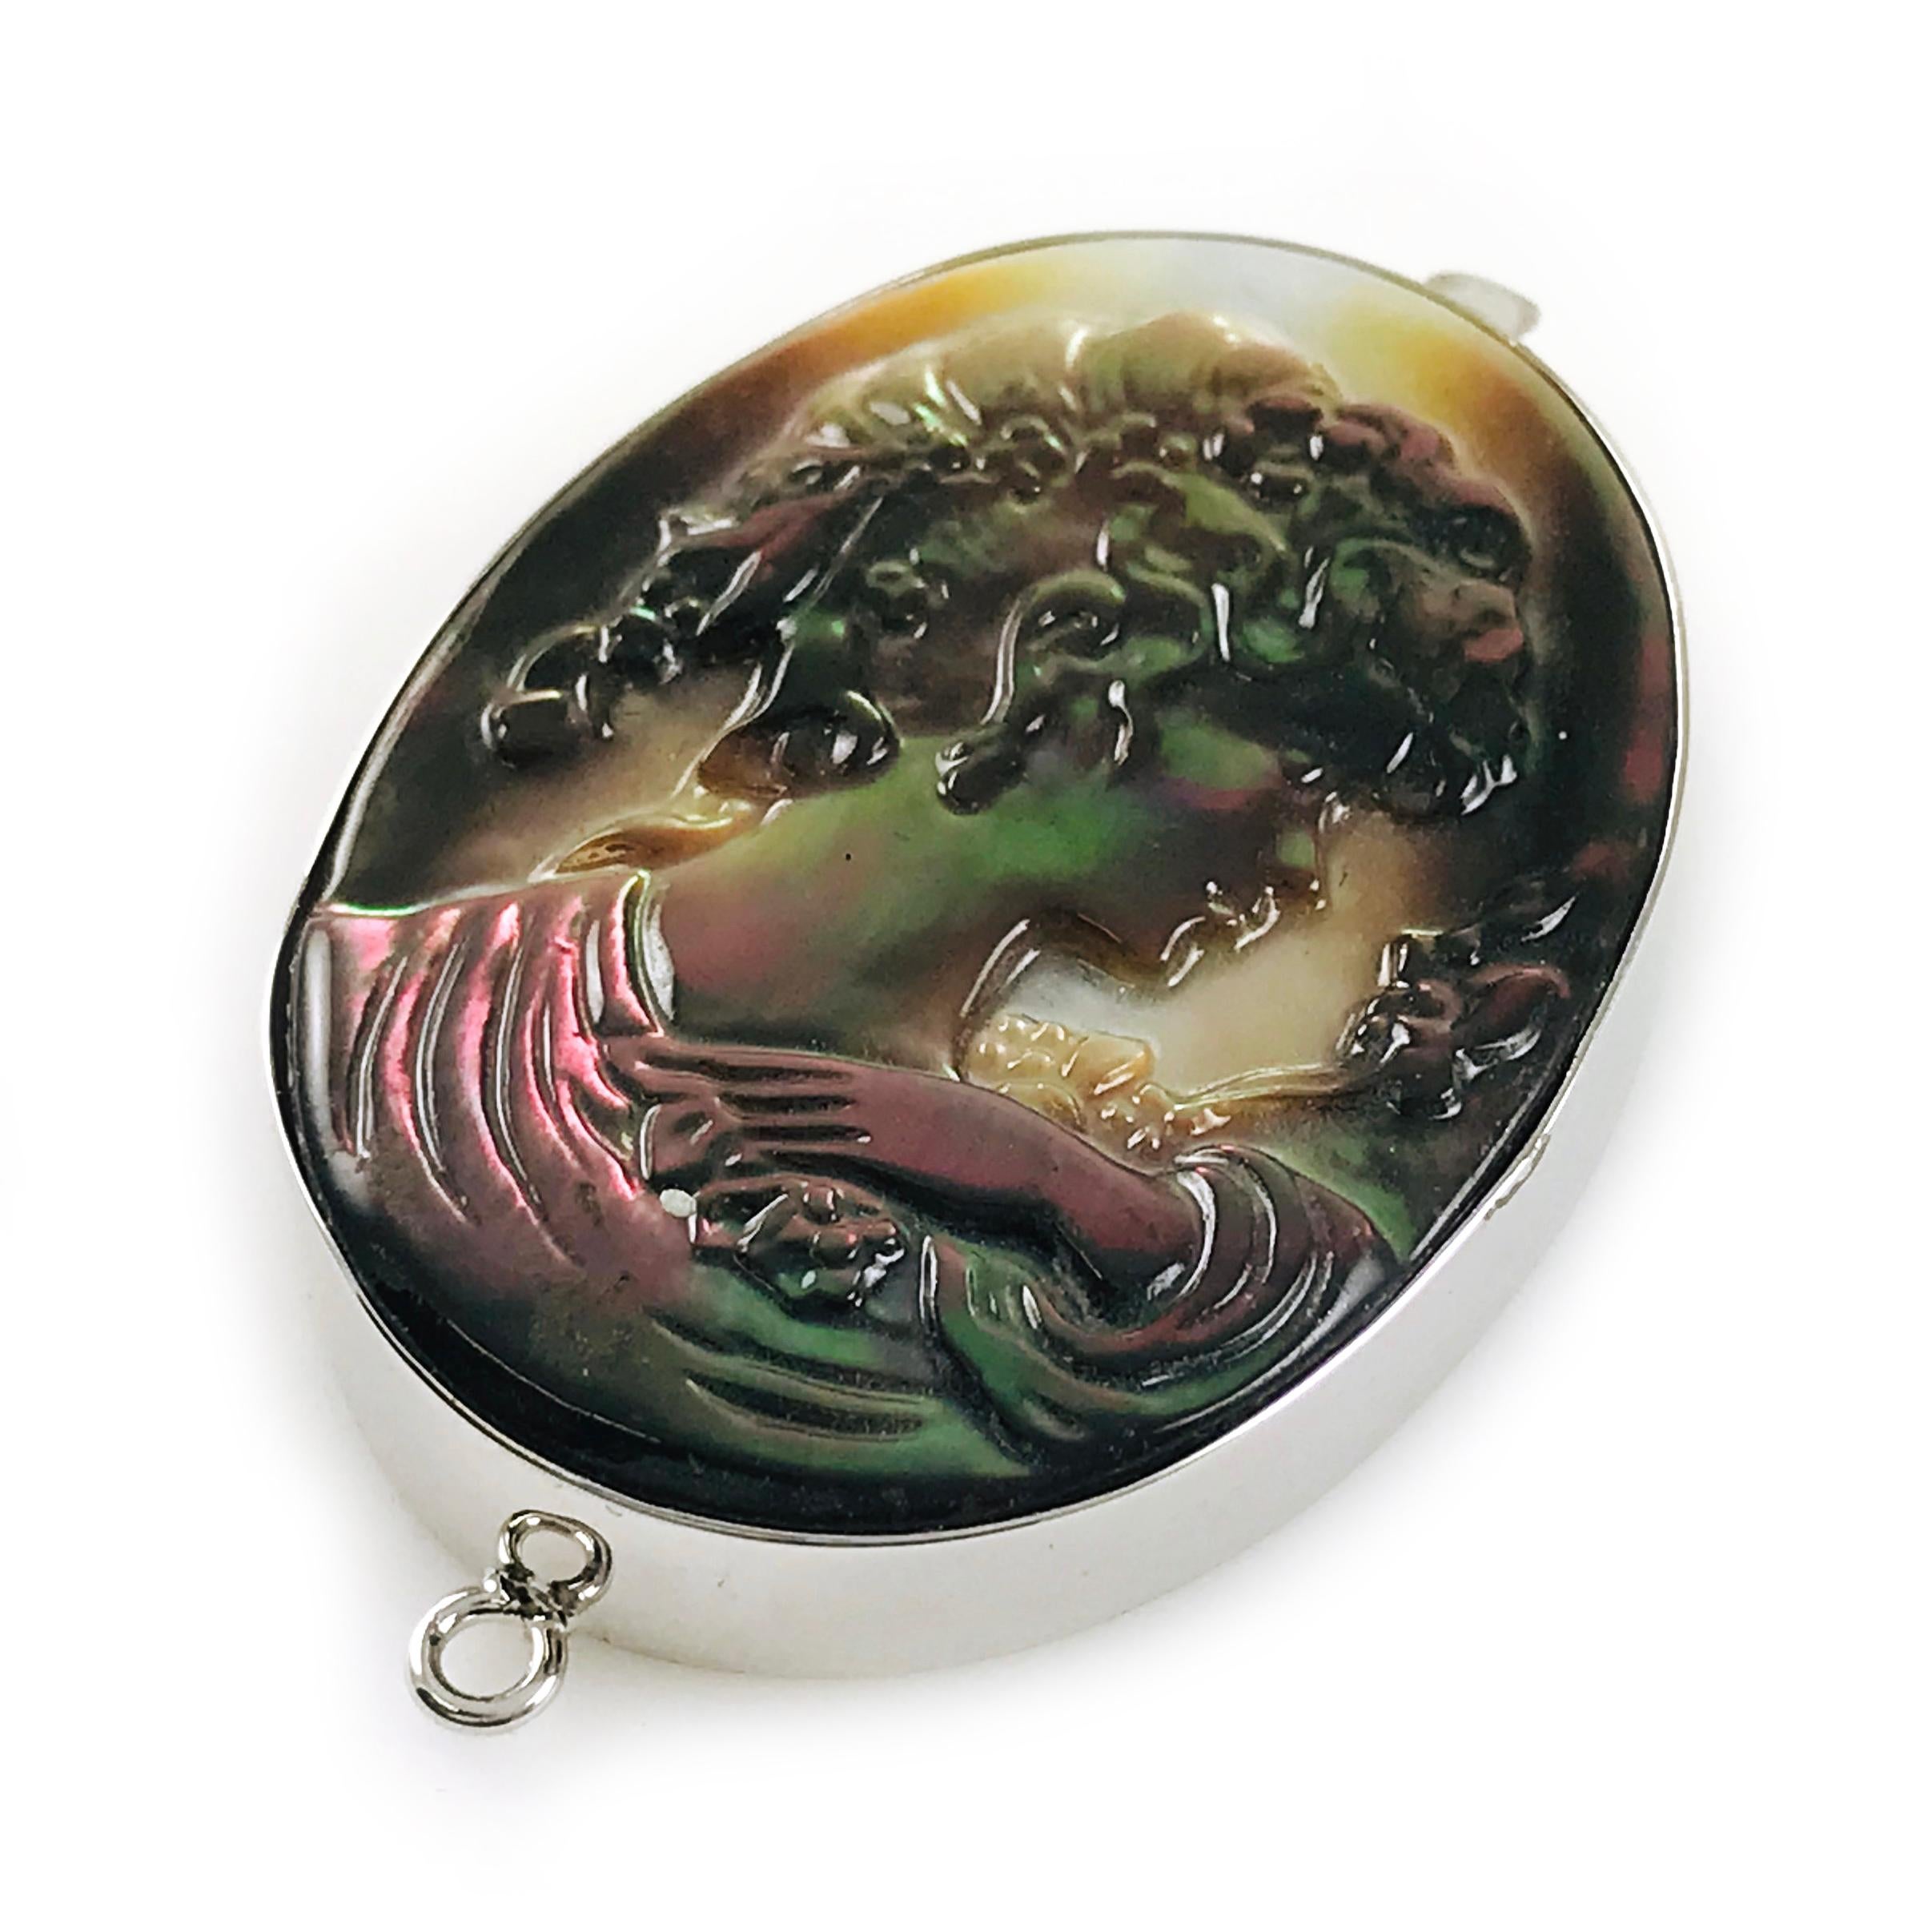 Sterling Silver Black Mother-of-Pearl Cameo Brooch Pendant. Portrait of a lady in profile. Beautifully carved by an artisan in Italy. The size of brooch pendant is approximately 1” x 2”. Could be worn as a brooch or a pendant on a chain. The brooch